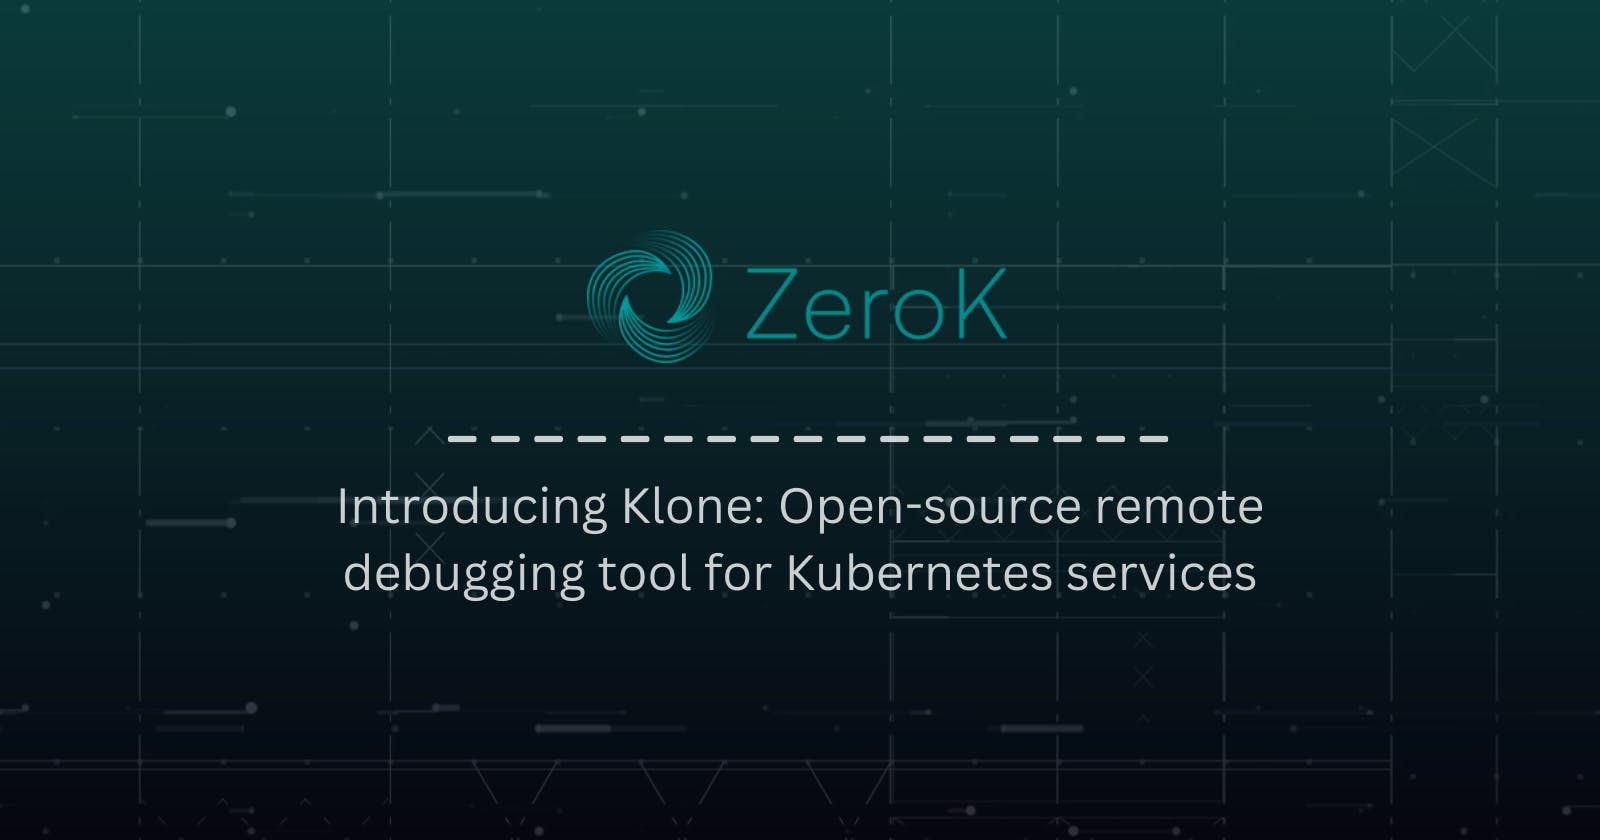 Introducing Klone: Open-source remote debugging tool for Kubernetes services